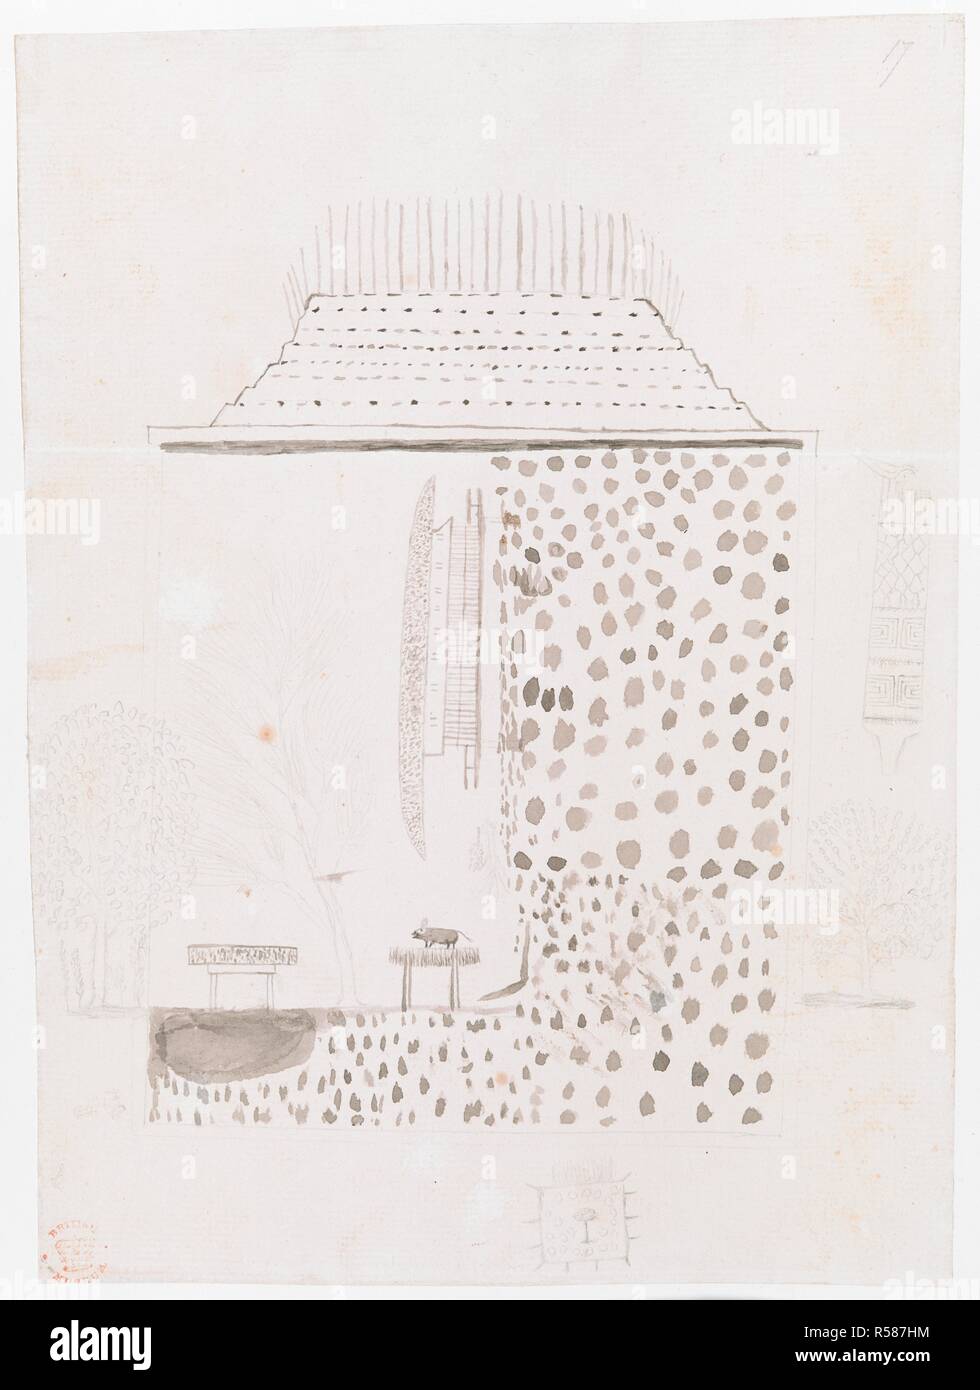 A native building. DRAWINGS, in Indian ink, illustrative of Capt. Cook's first voyage, 1768 -1770, chiefly relating to Otaheite and New Zealand, by A. Buchan, John F. Miller, and others. 1786-1770. Source: Add. 15508 f.15, no.17. Stock Photo